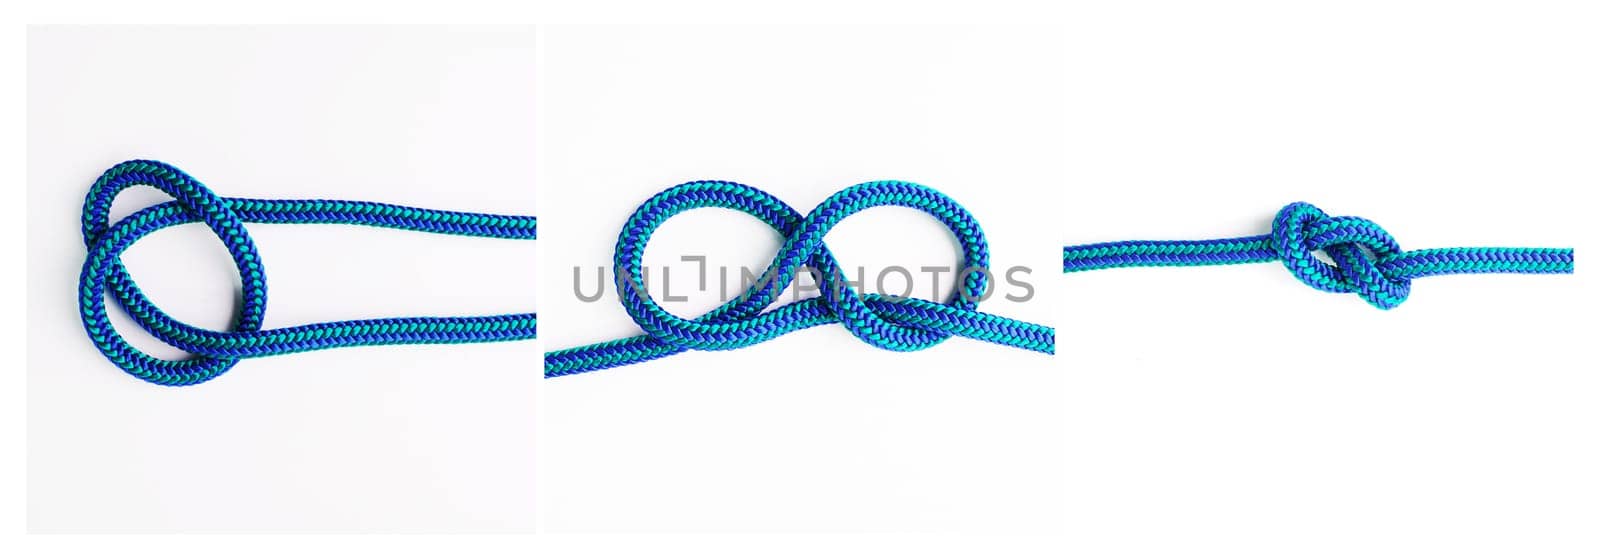 knot, instruction or steps to tie ropes and material on white background in studio for security. Frames, cords or blue design for learning technique, gear tools or safety for survival guide lesson.